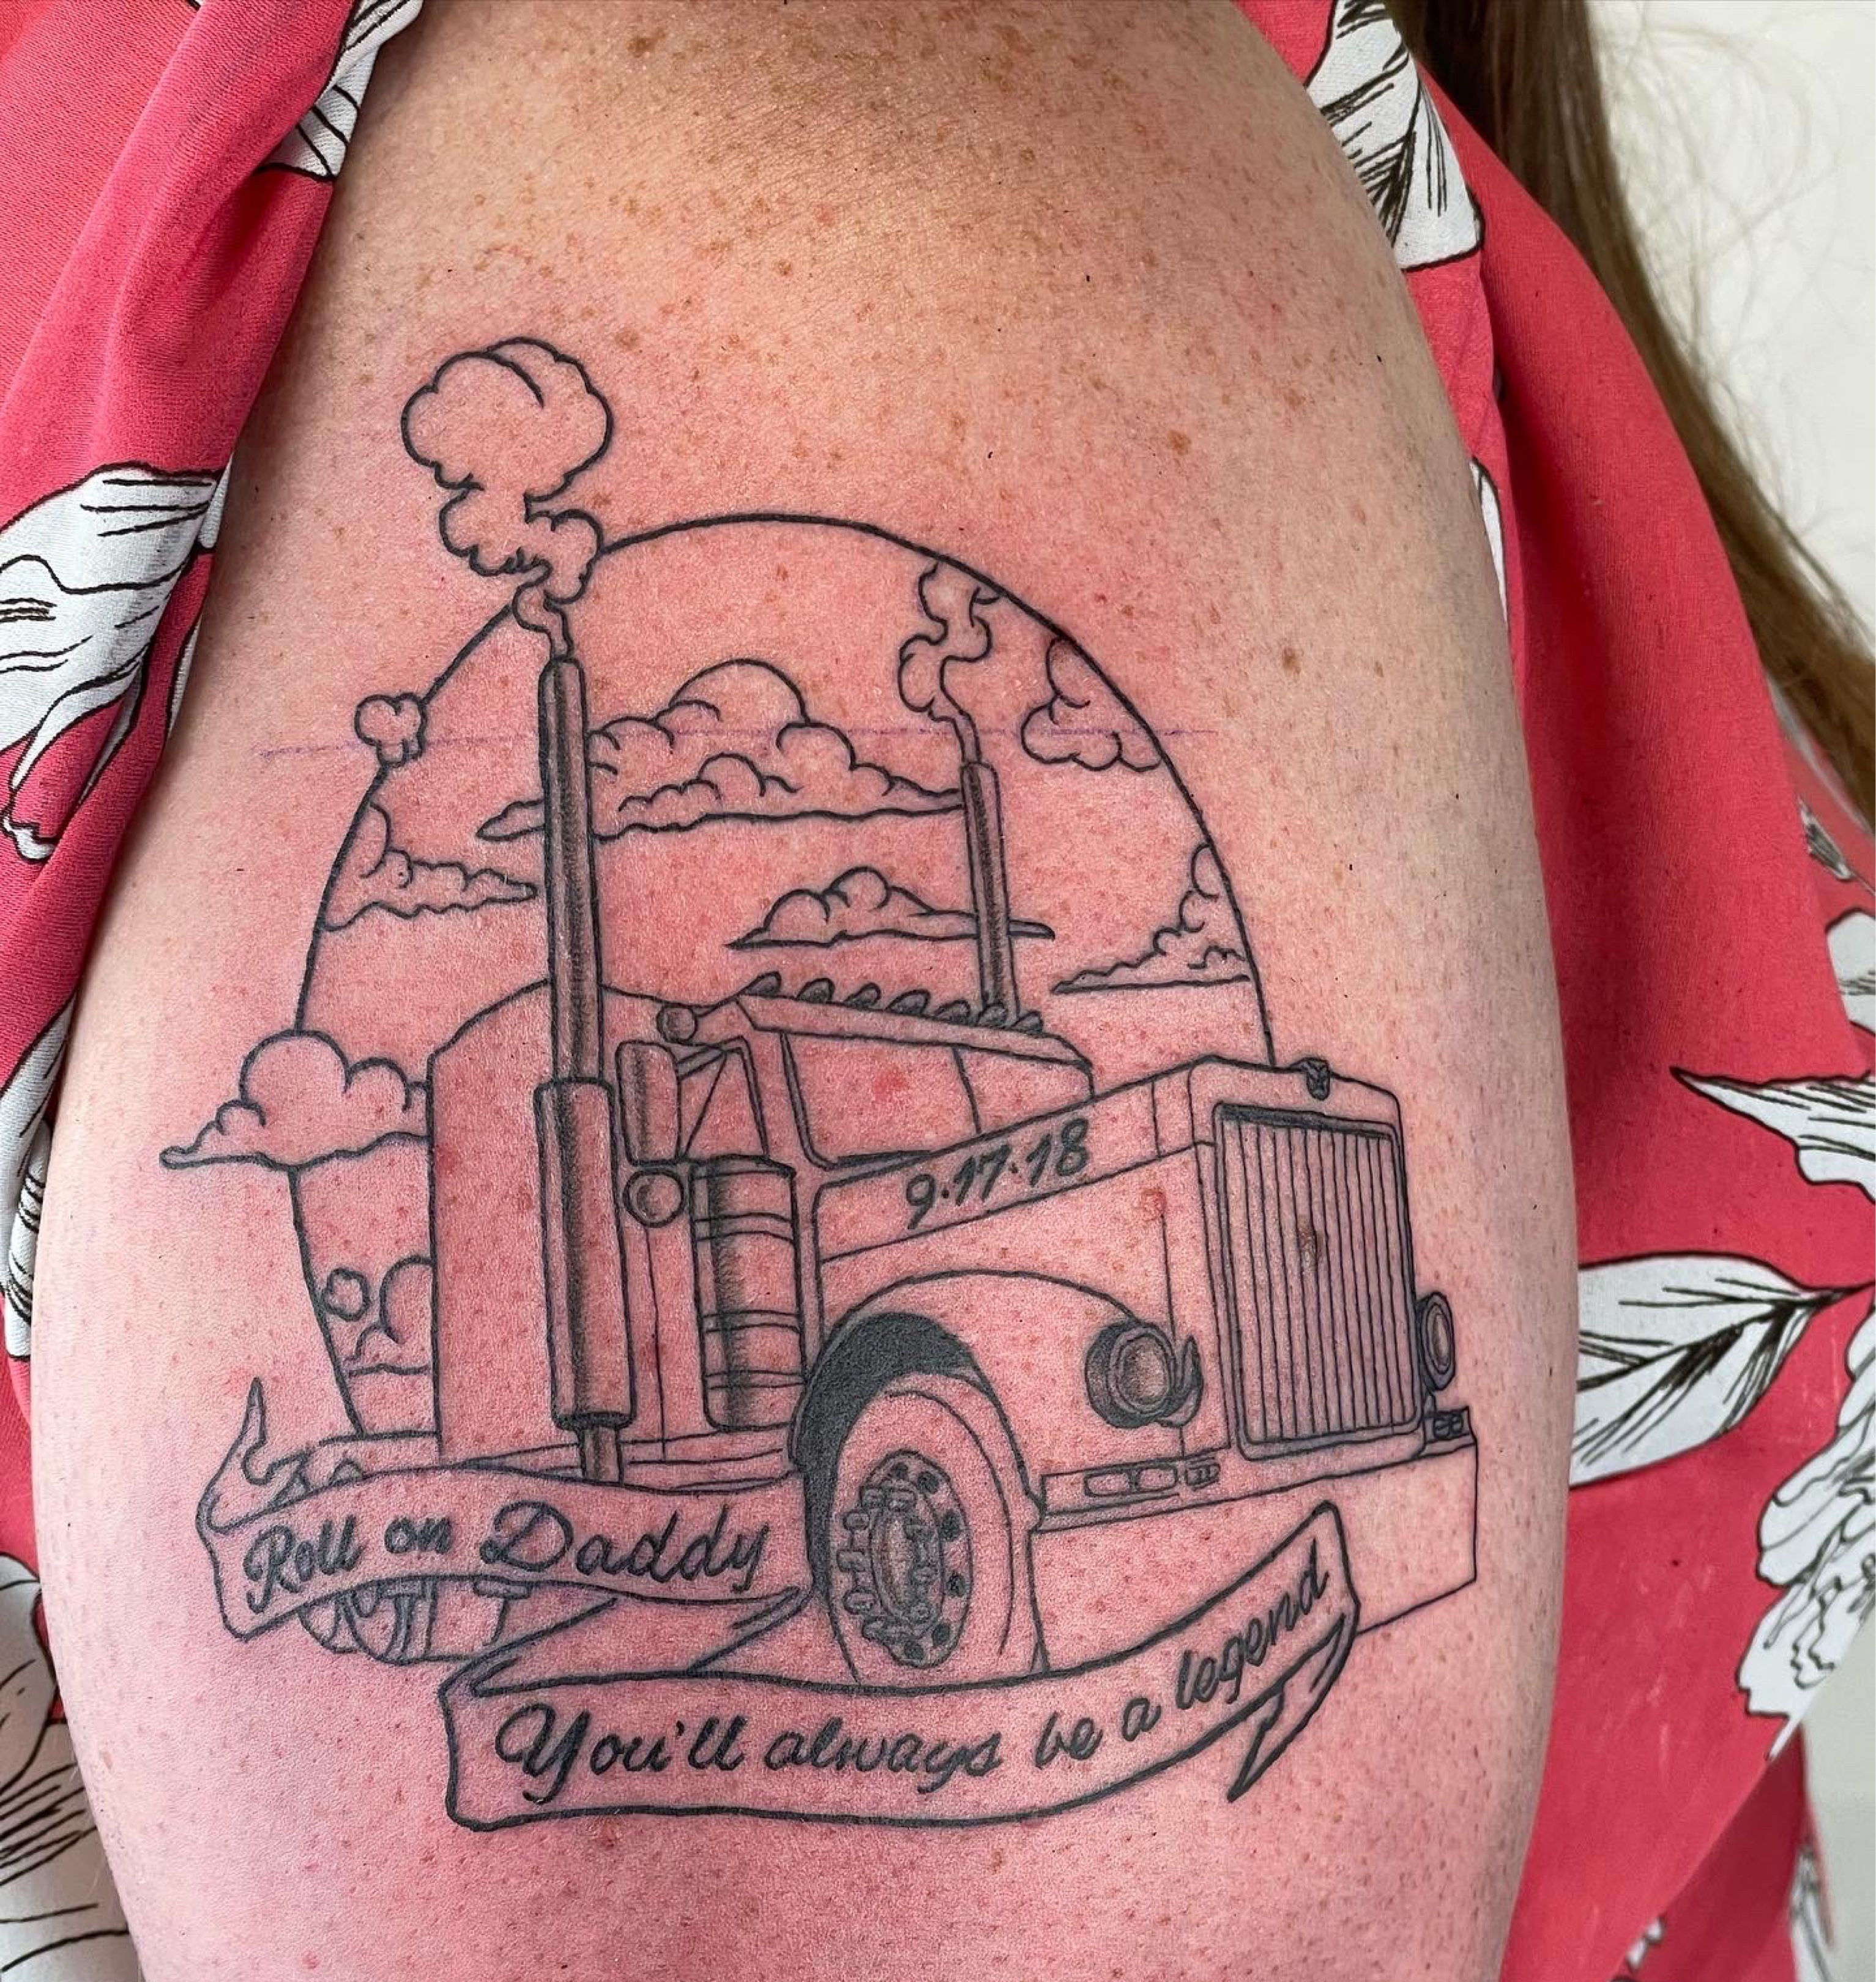 This mack truck tattoo was a fun project Message me if youre interested  in getting a new tattoo or 30 piercing soon  By Tattoos by Paul   Facebook